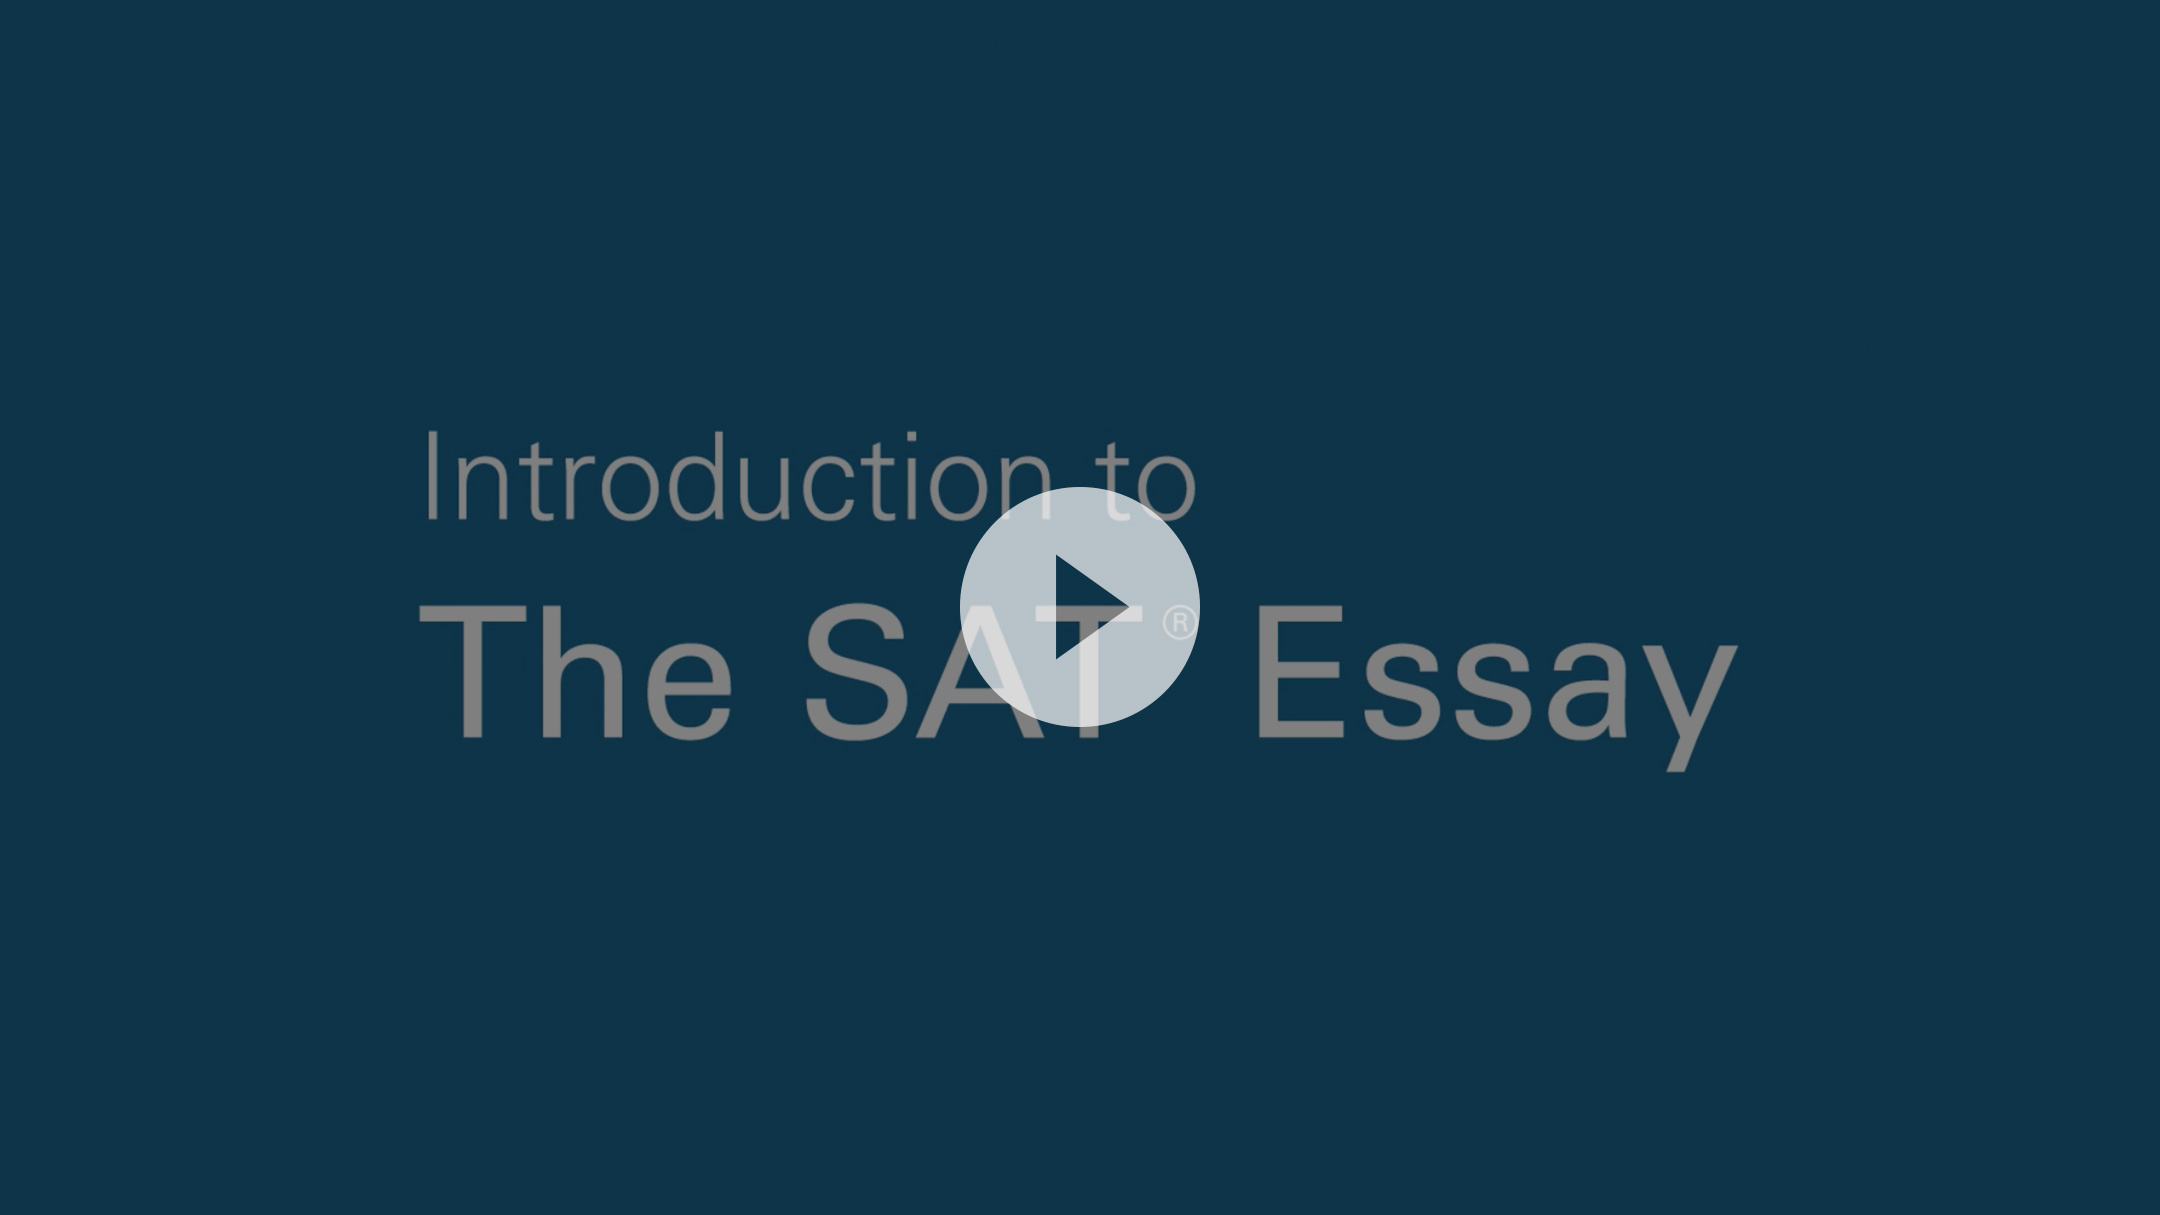 Fears of a Professional essay